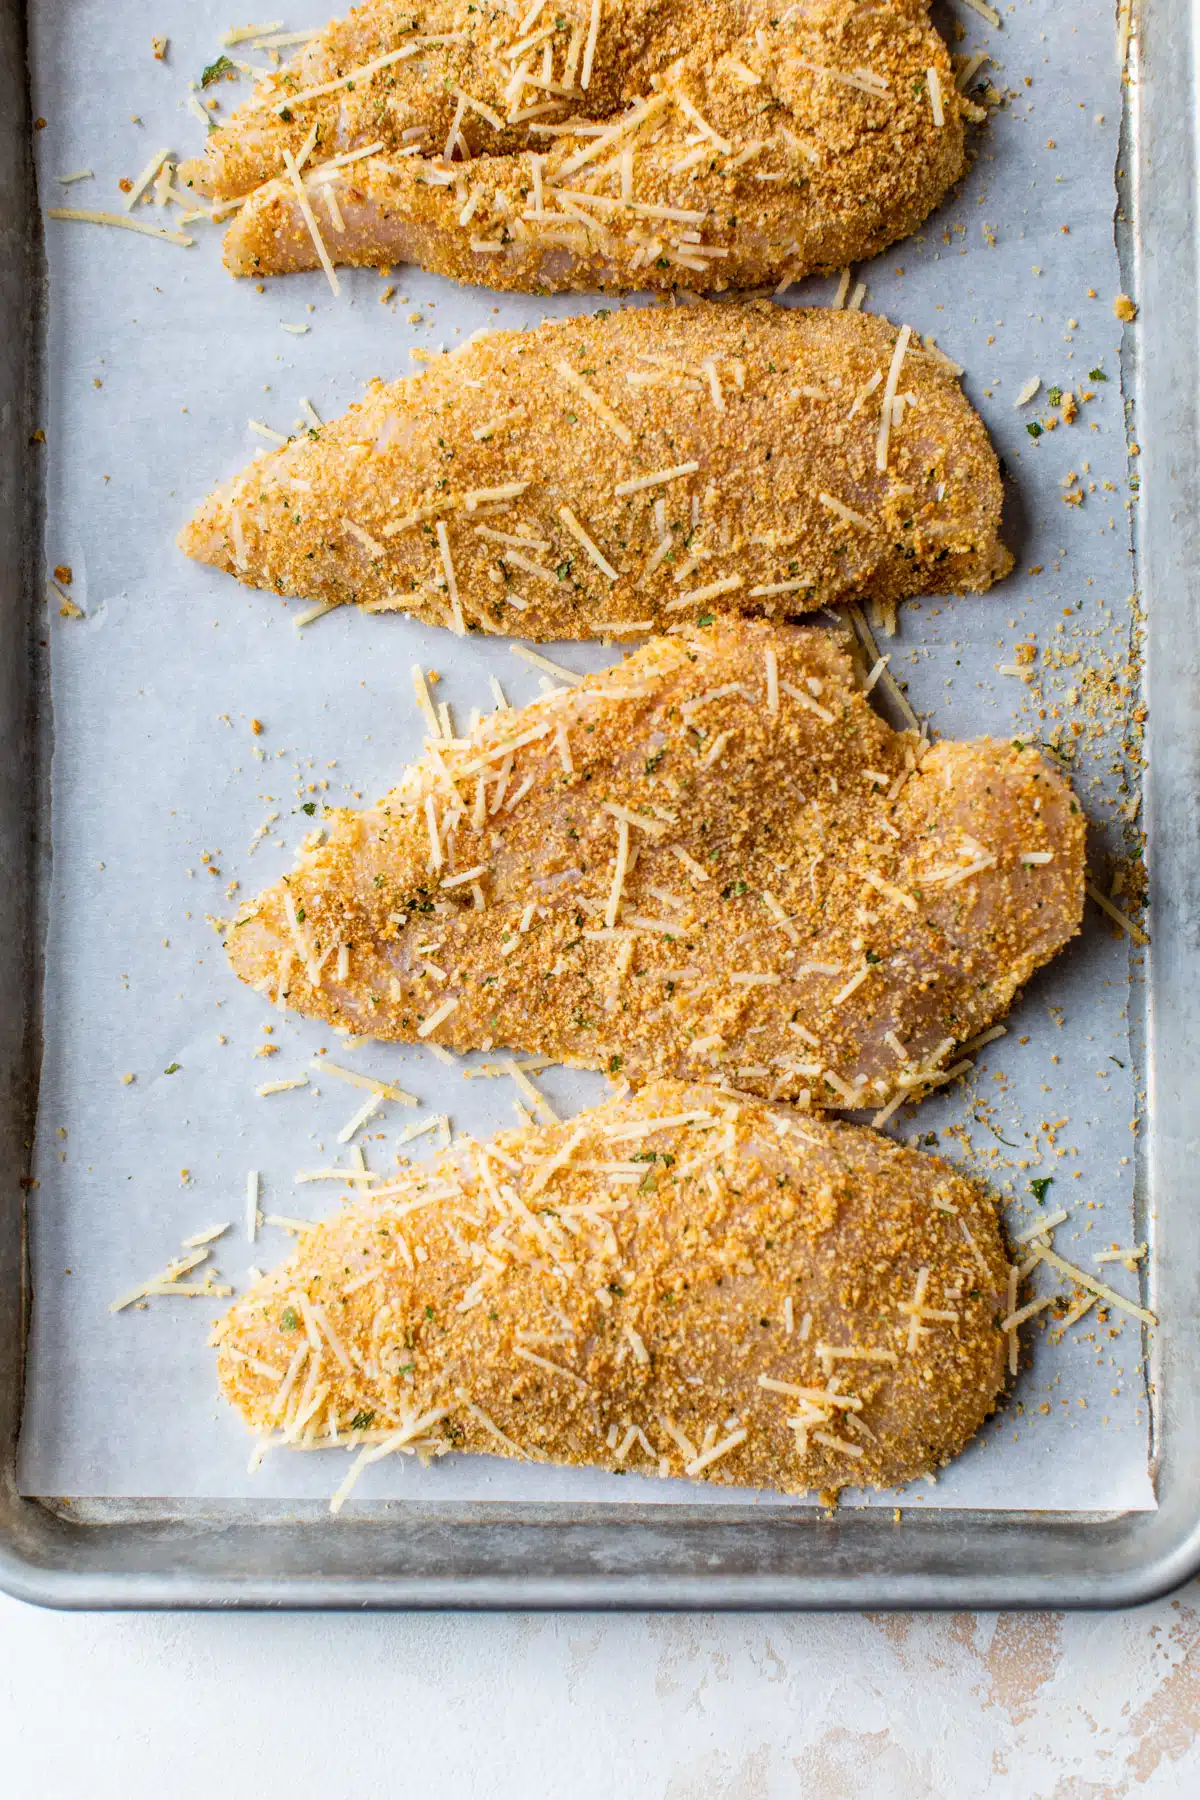 raw chicken breasts coated in cheese and breadcrumbs on a baking sheet